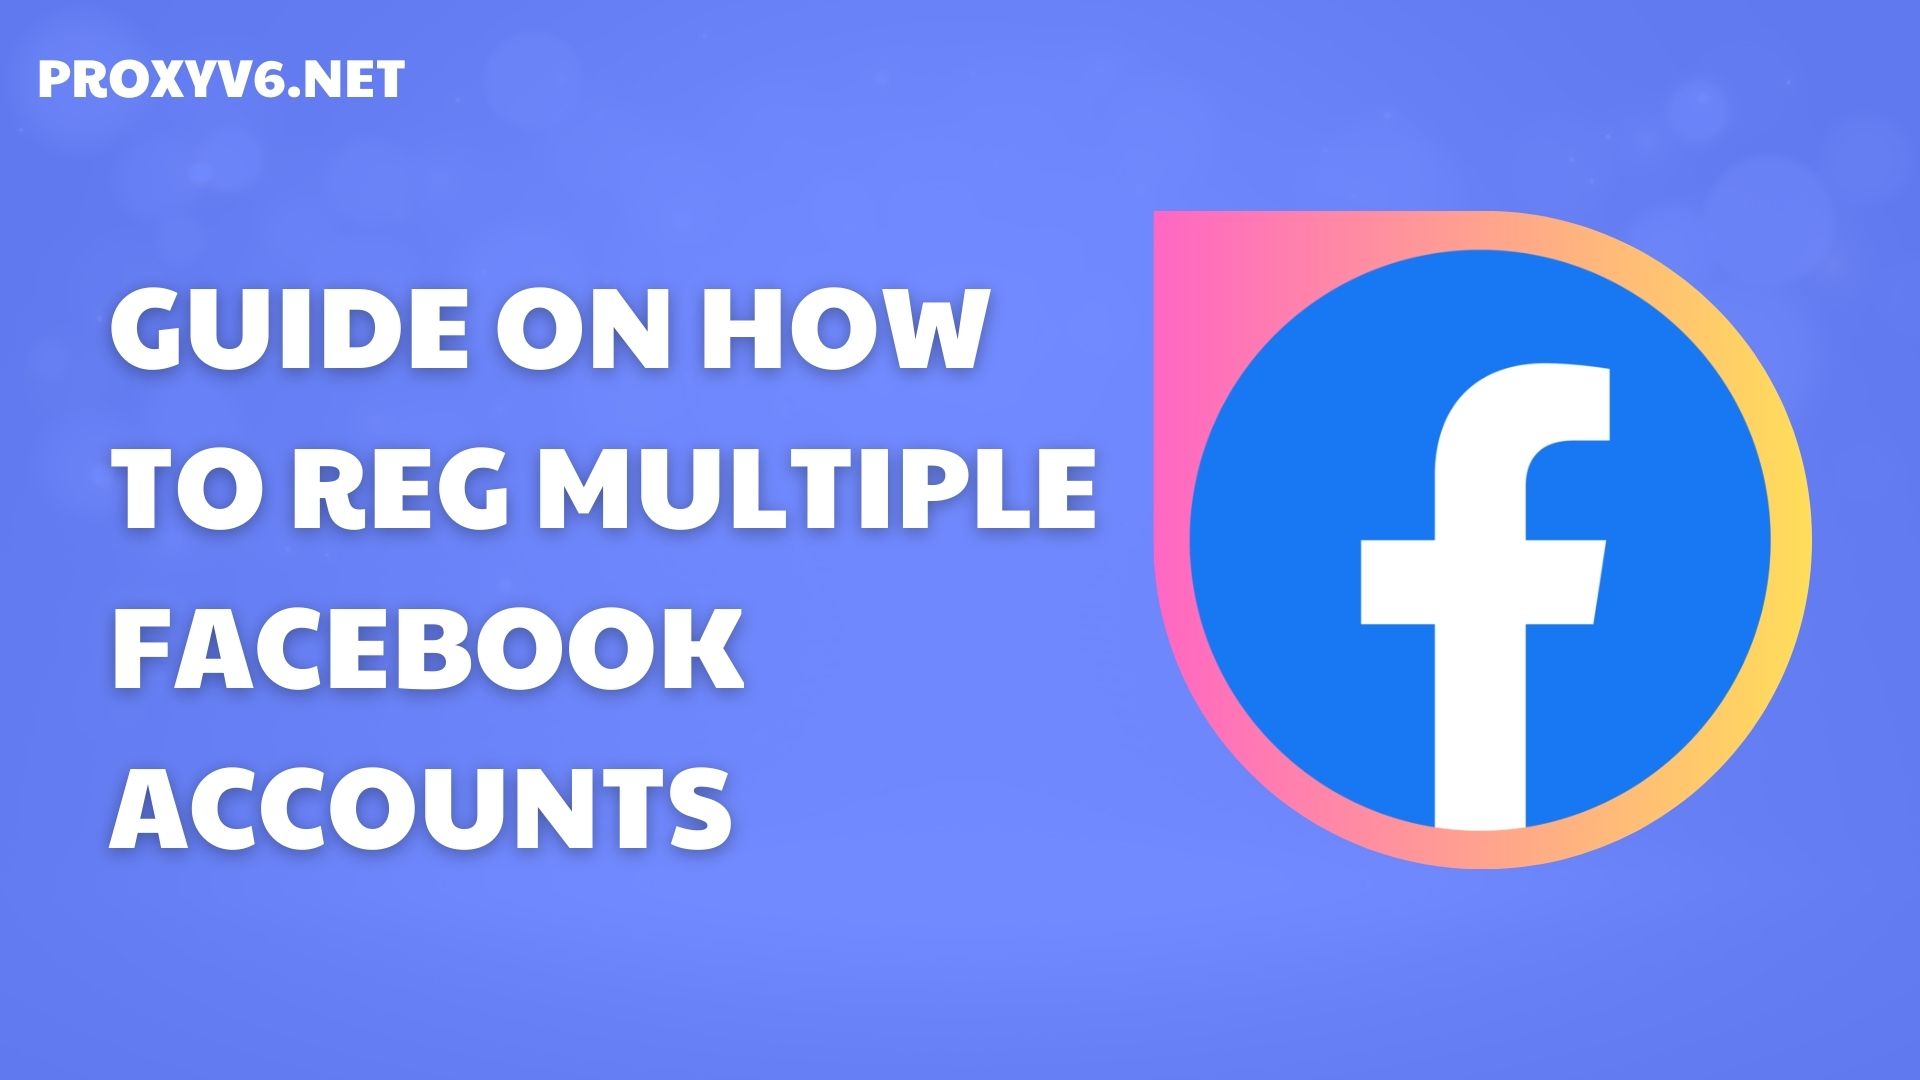 Guide on how to REG multiple Facebook accounts